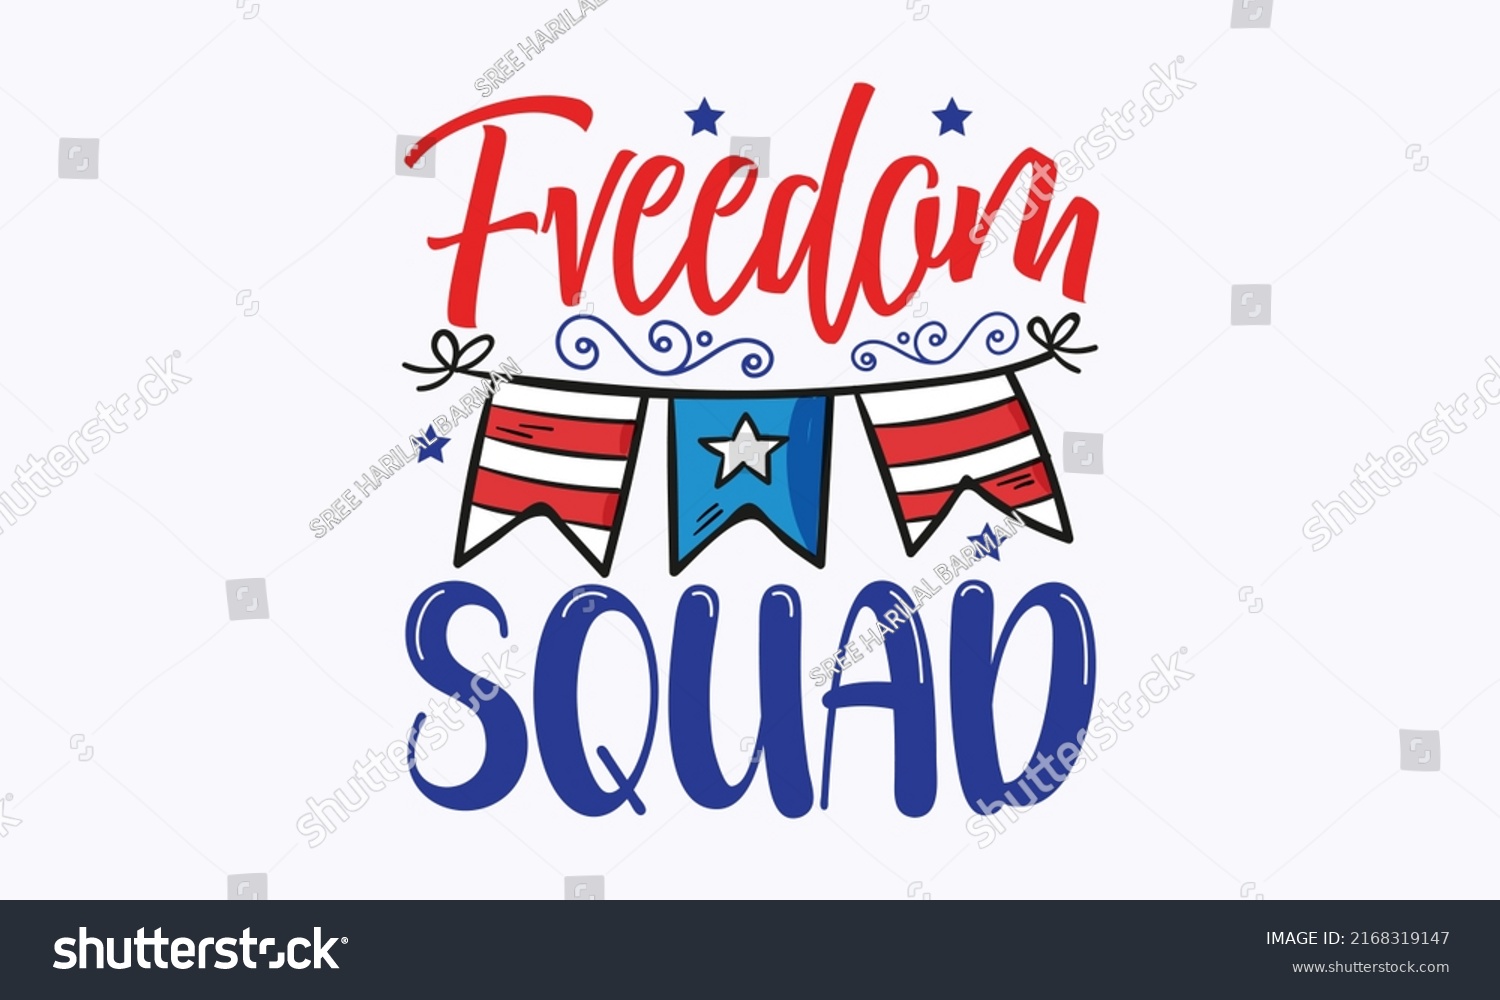 SVG of fveedom squad - 4th of July rainbow svg vector image isolated on white background. 4th of July fireworks svg for design shirt and scrapbooking. Good for advertising, poster, announcement, invitation,  svg